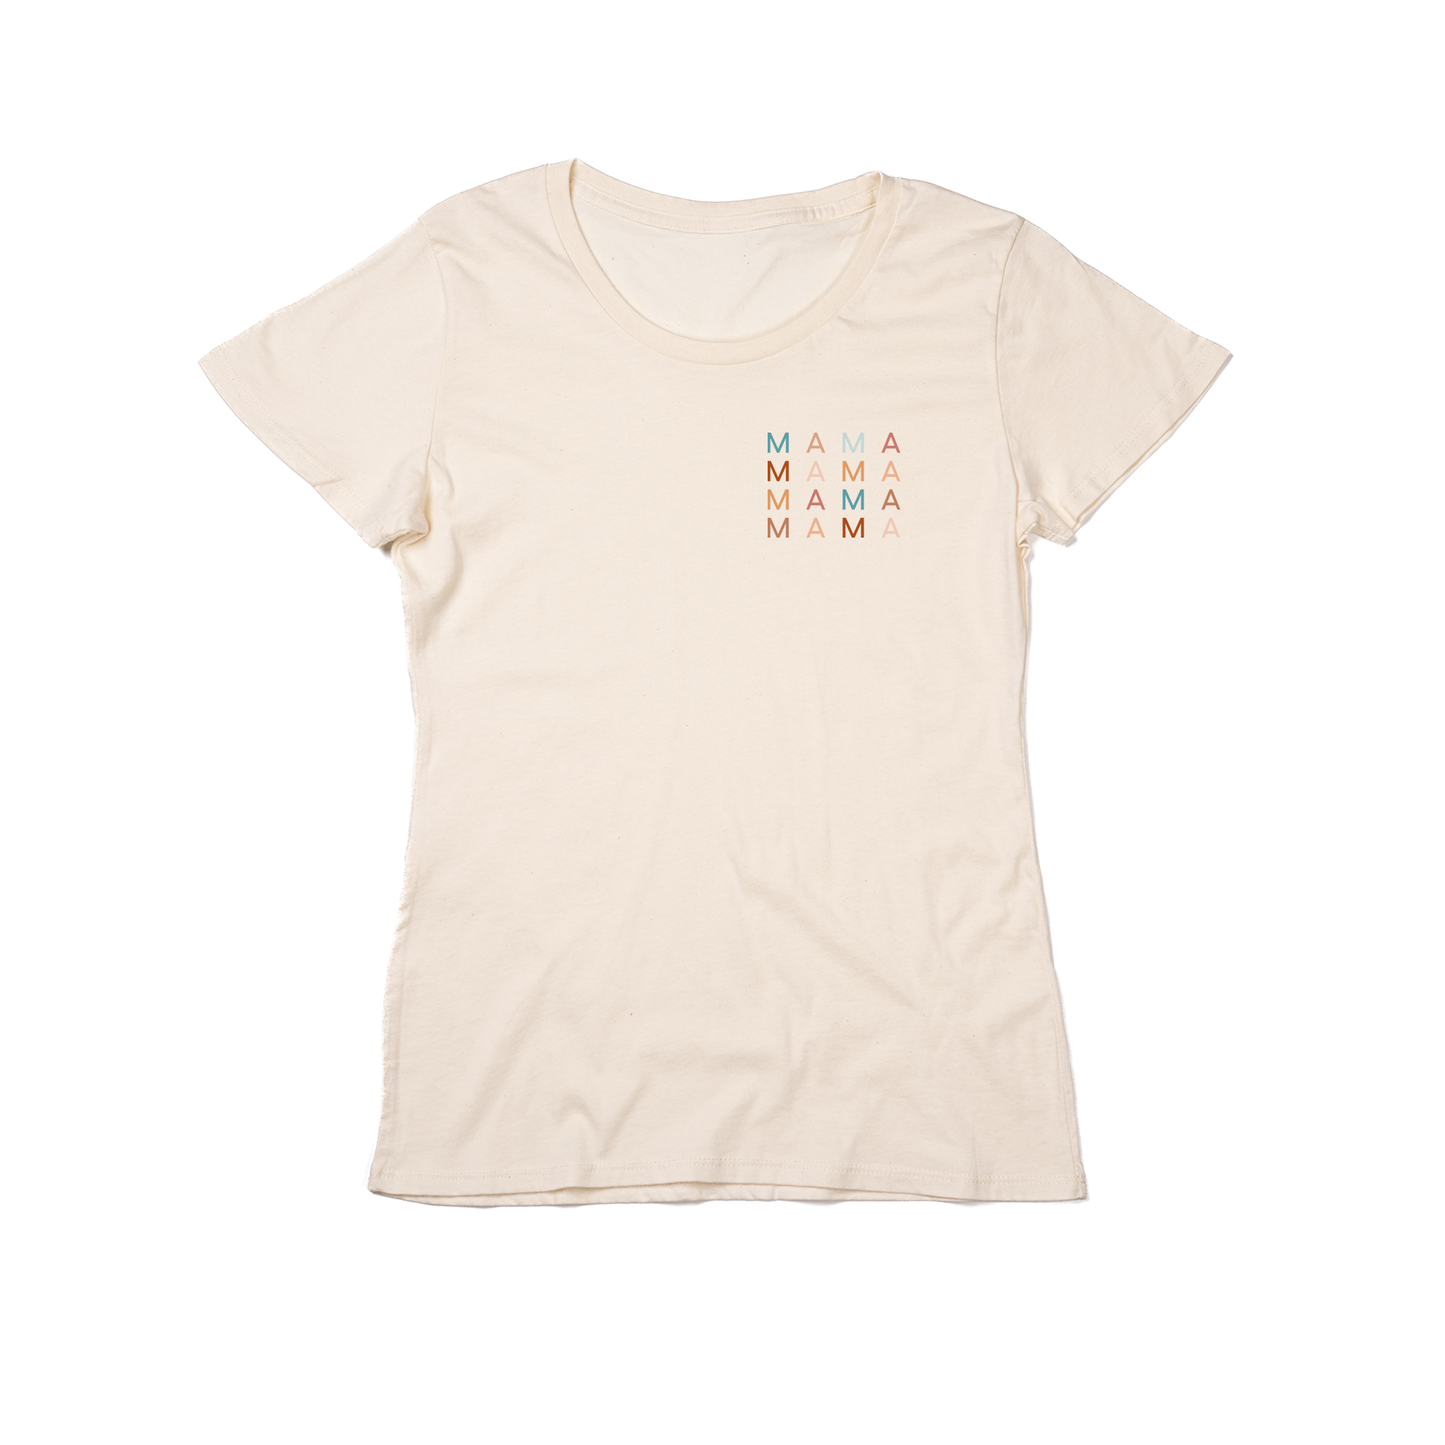 Mama (Stacked Multicolor, Pocket) - Women's Fitted Tee (Natural)